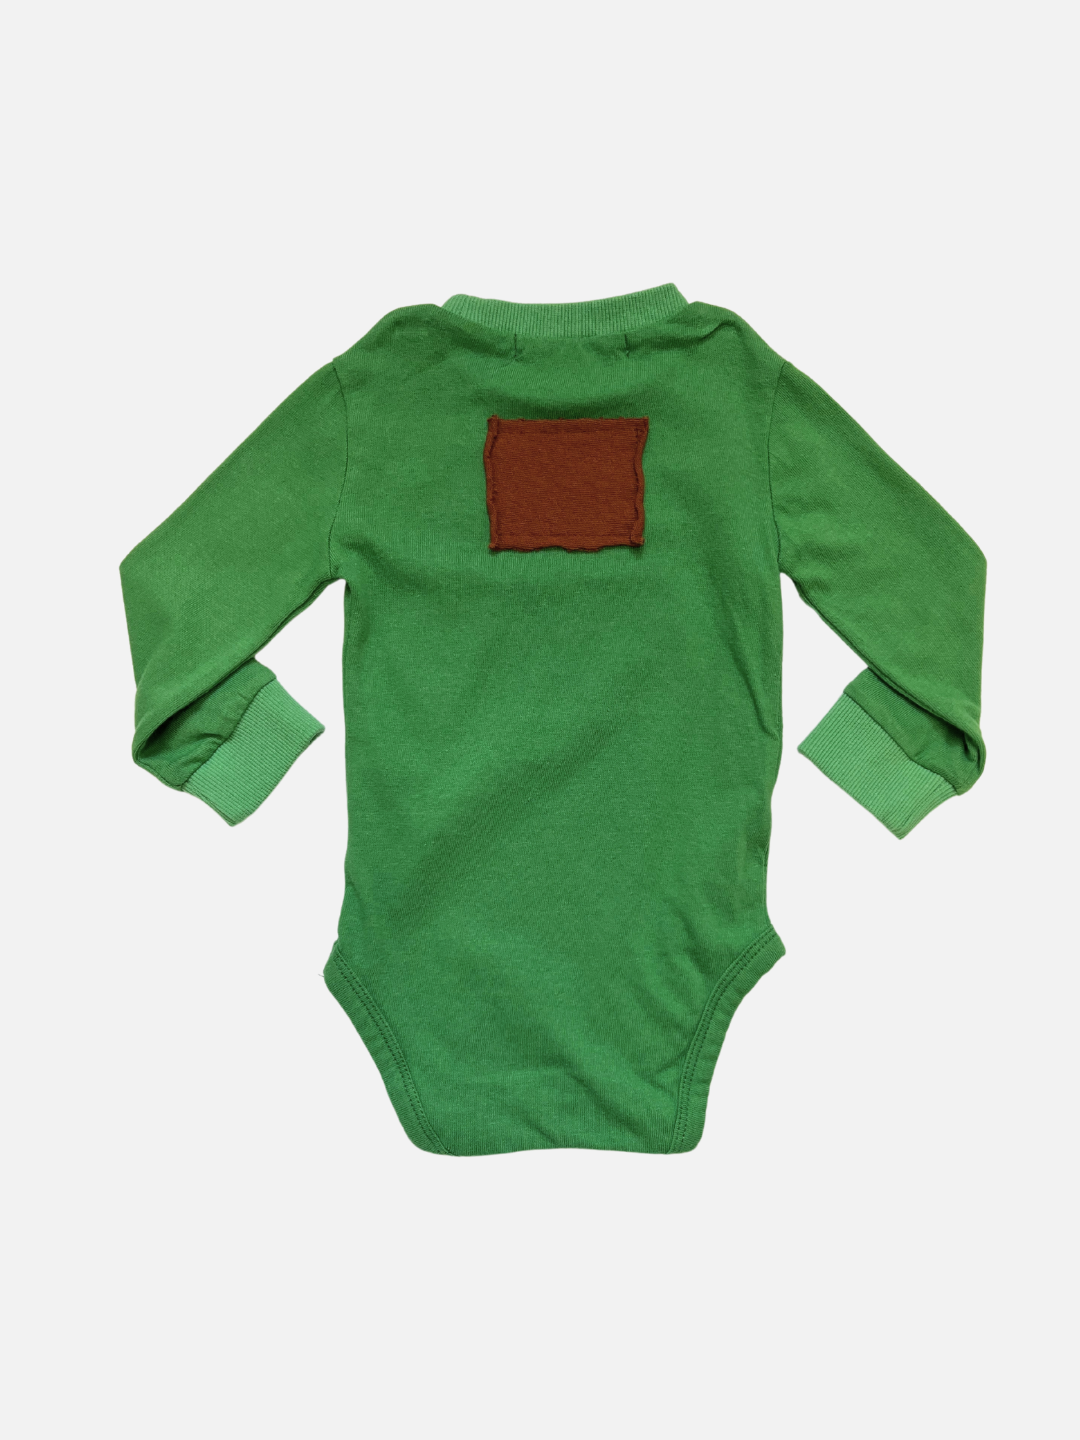 A back view of the patch onesie in Green with a brown rectangular patch on the back